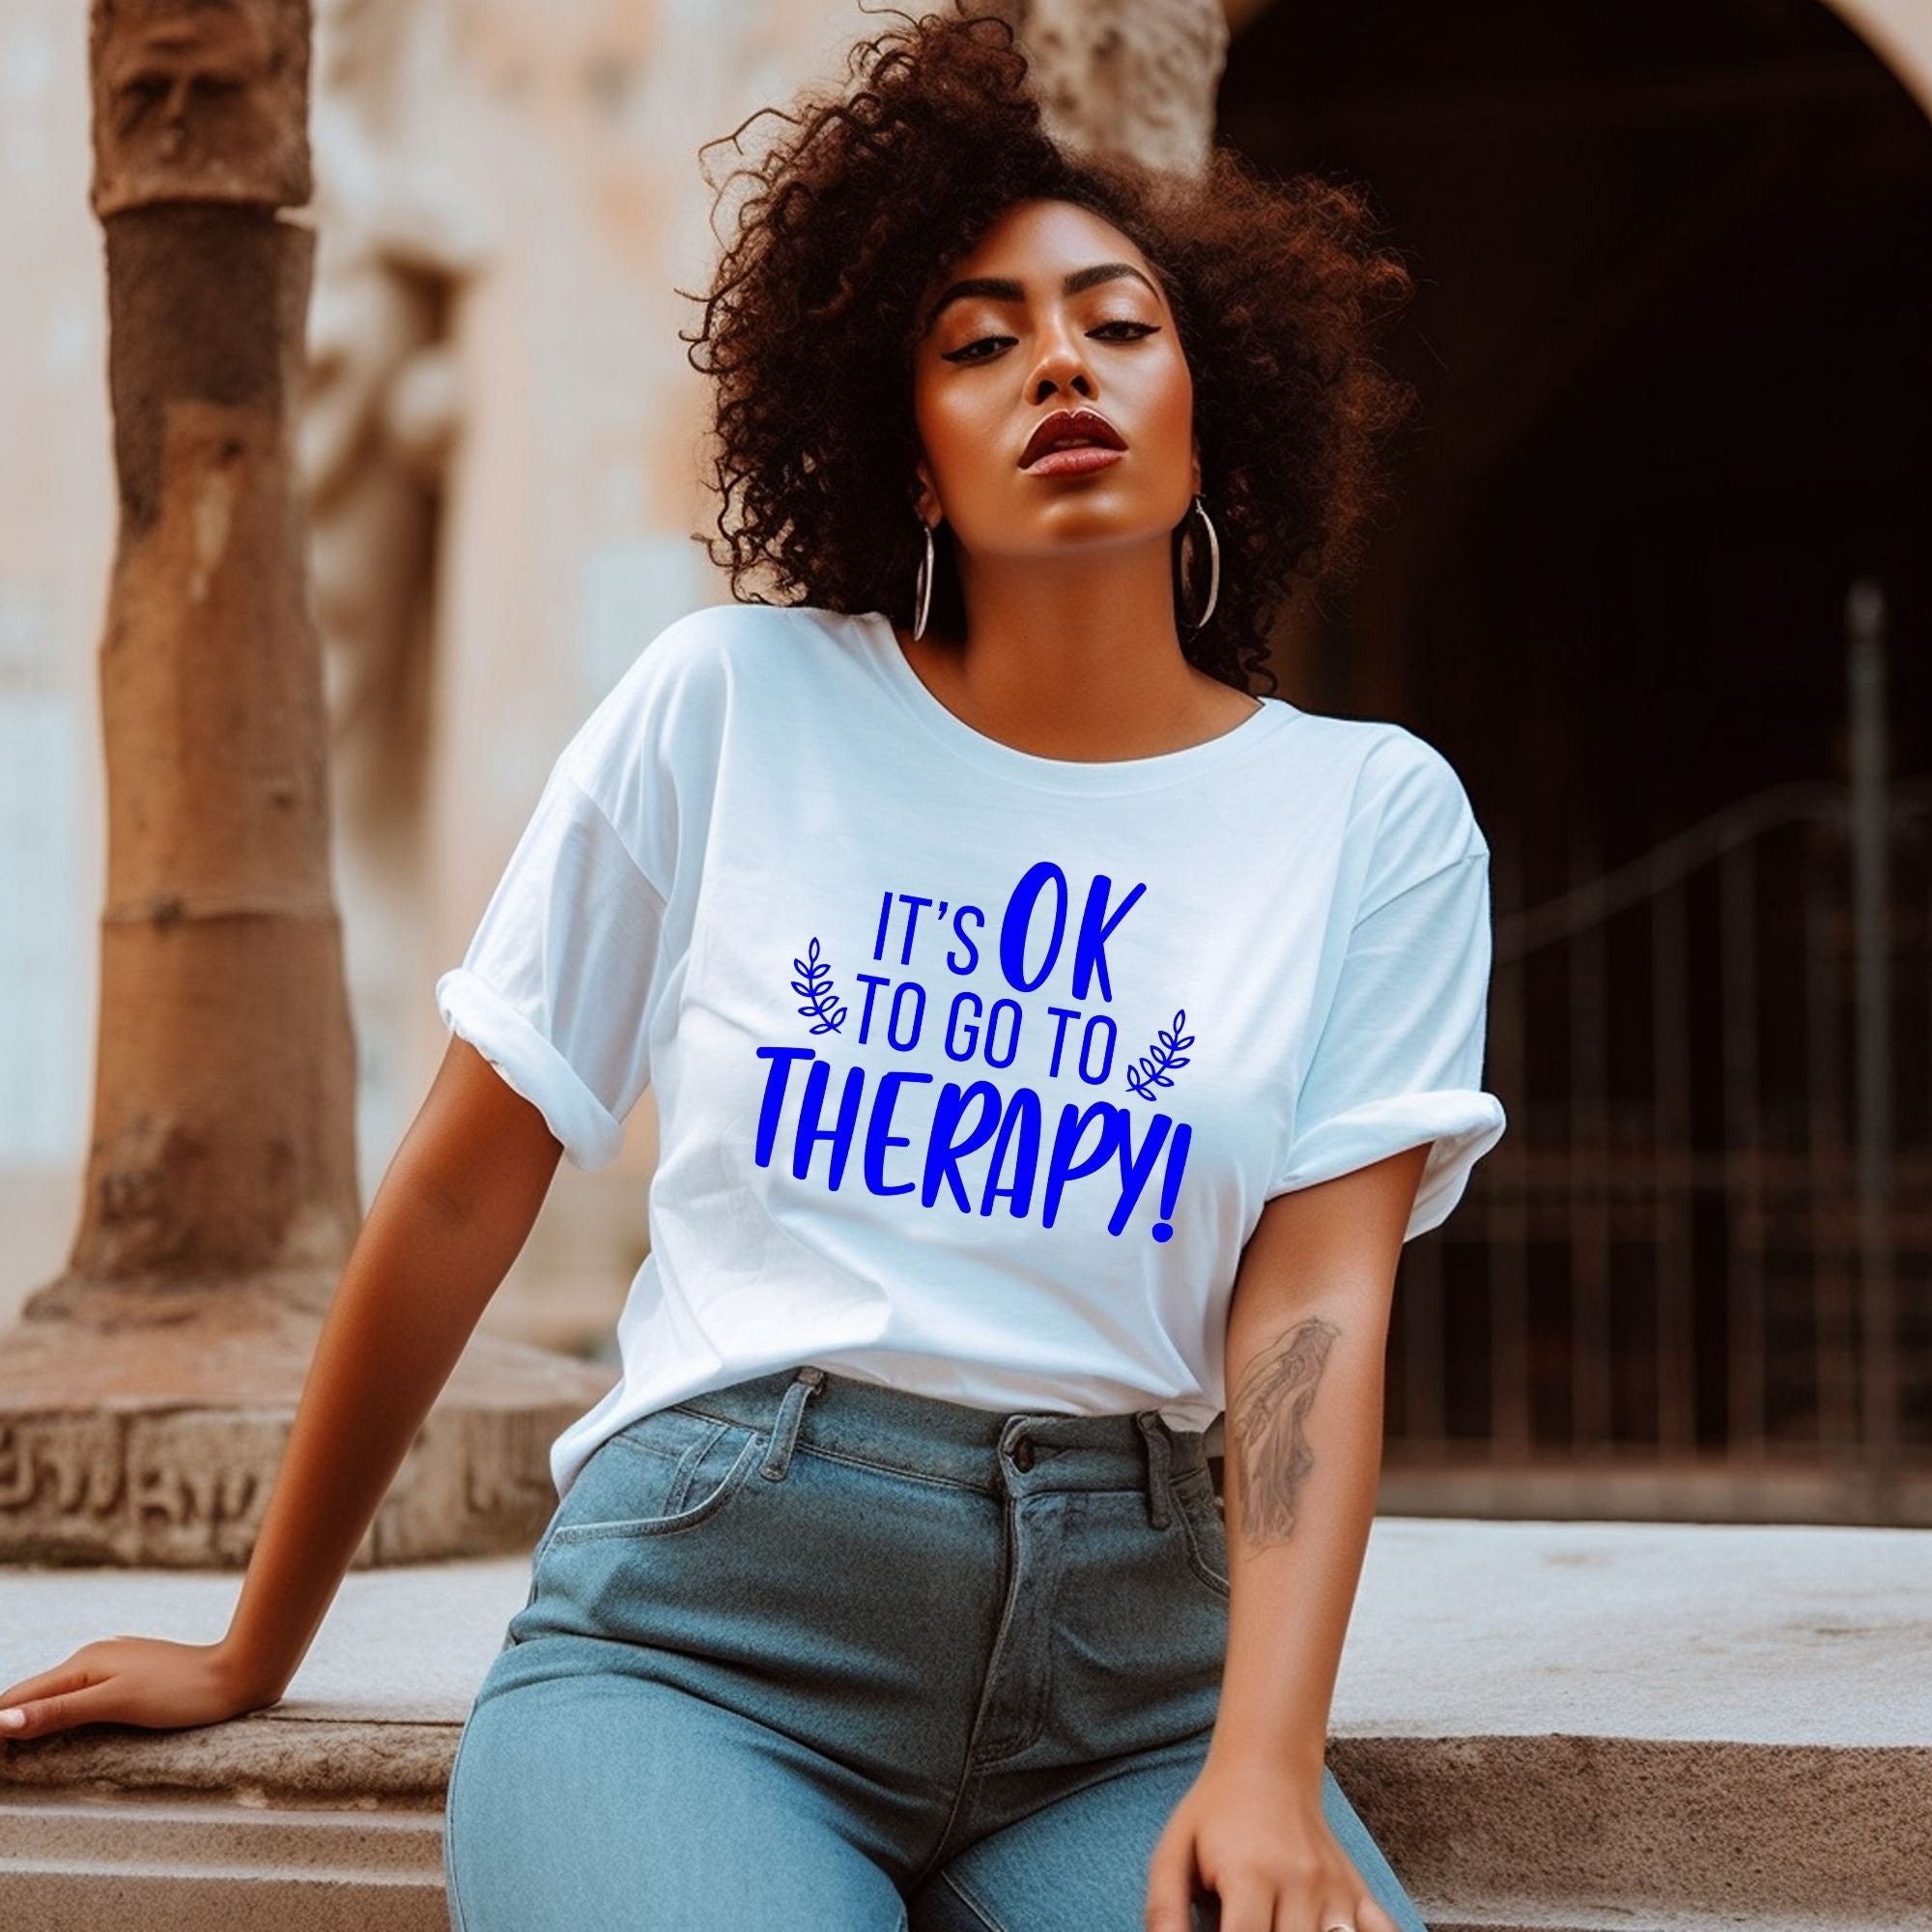 It's Okay To Go To Therapy Blue Unisex Fit Shirt